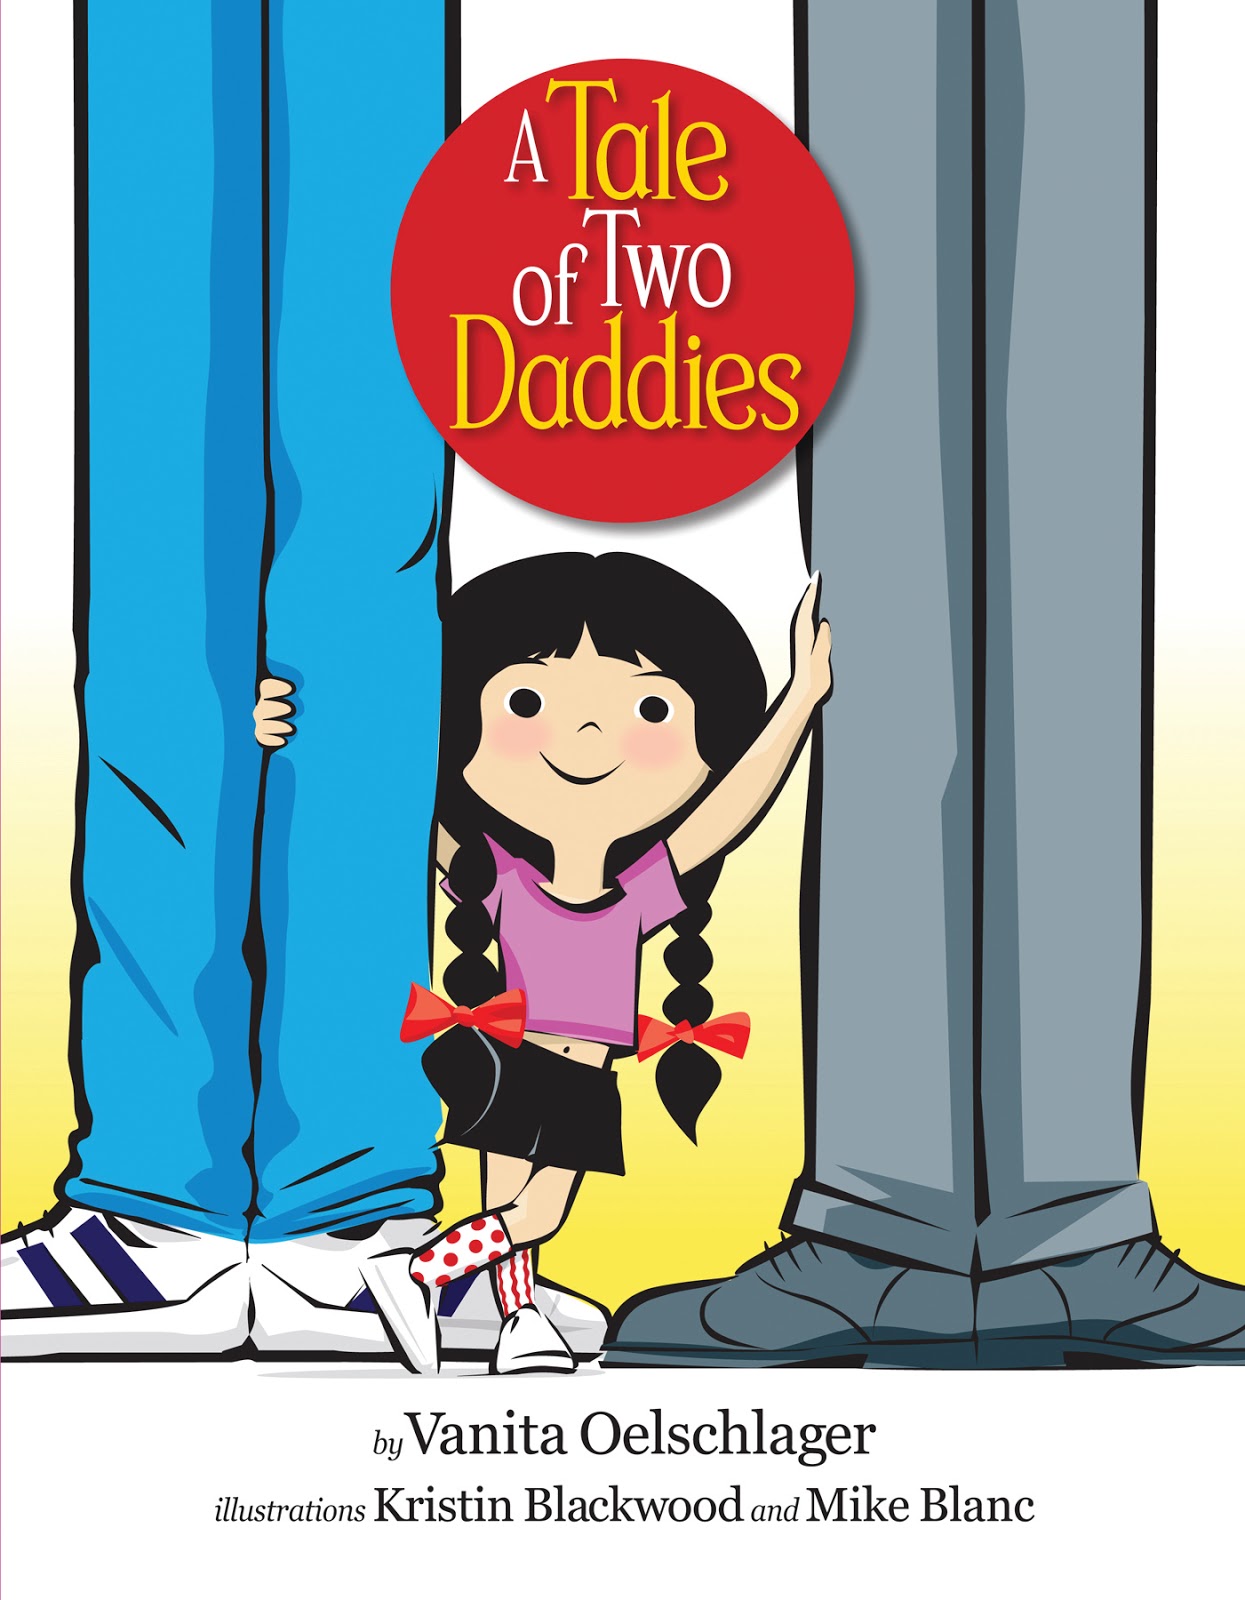 A Tale of Two Daddies Vanita Oelschlager and Kristin Blackwood